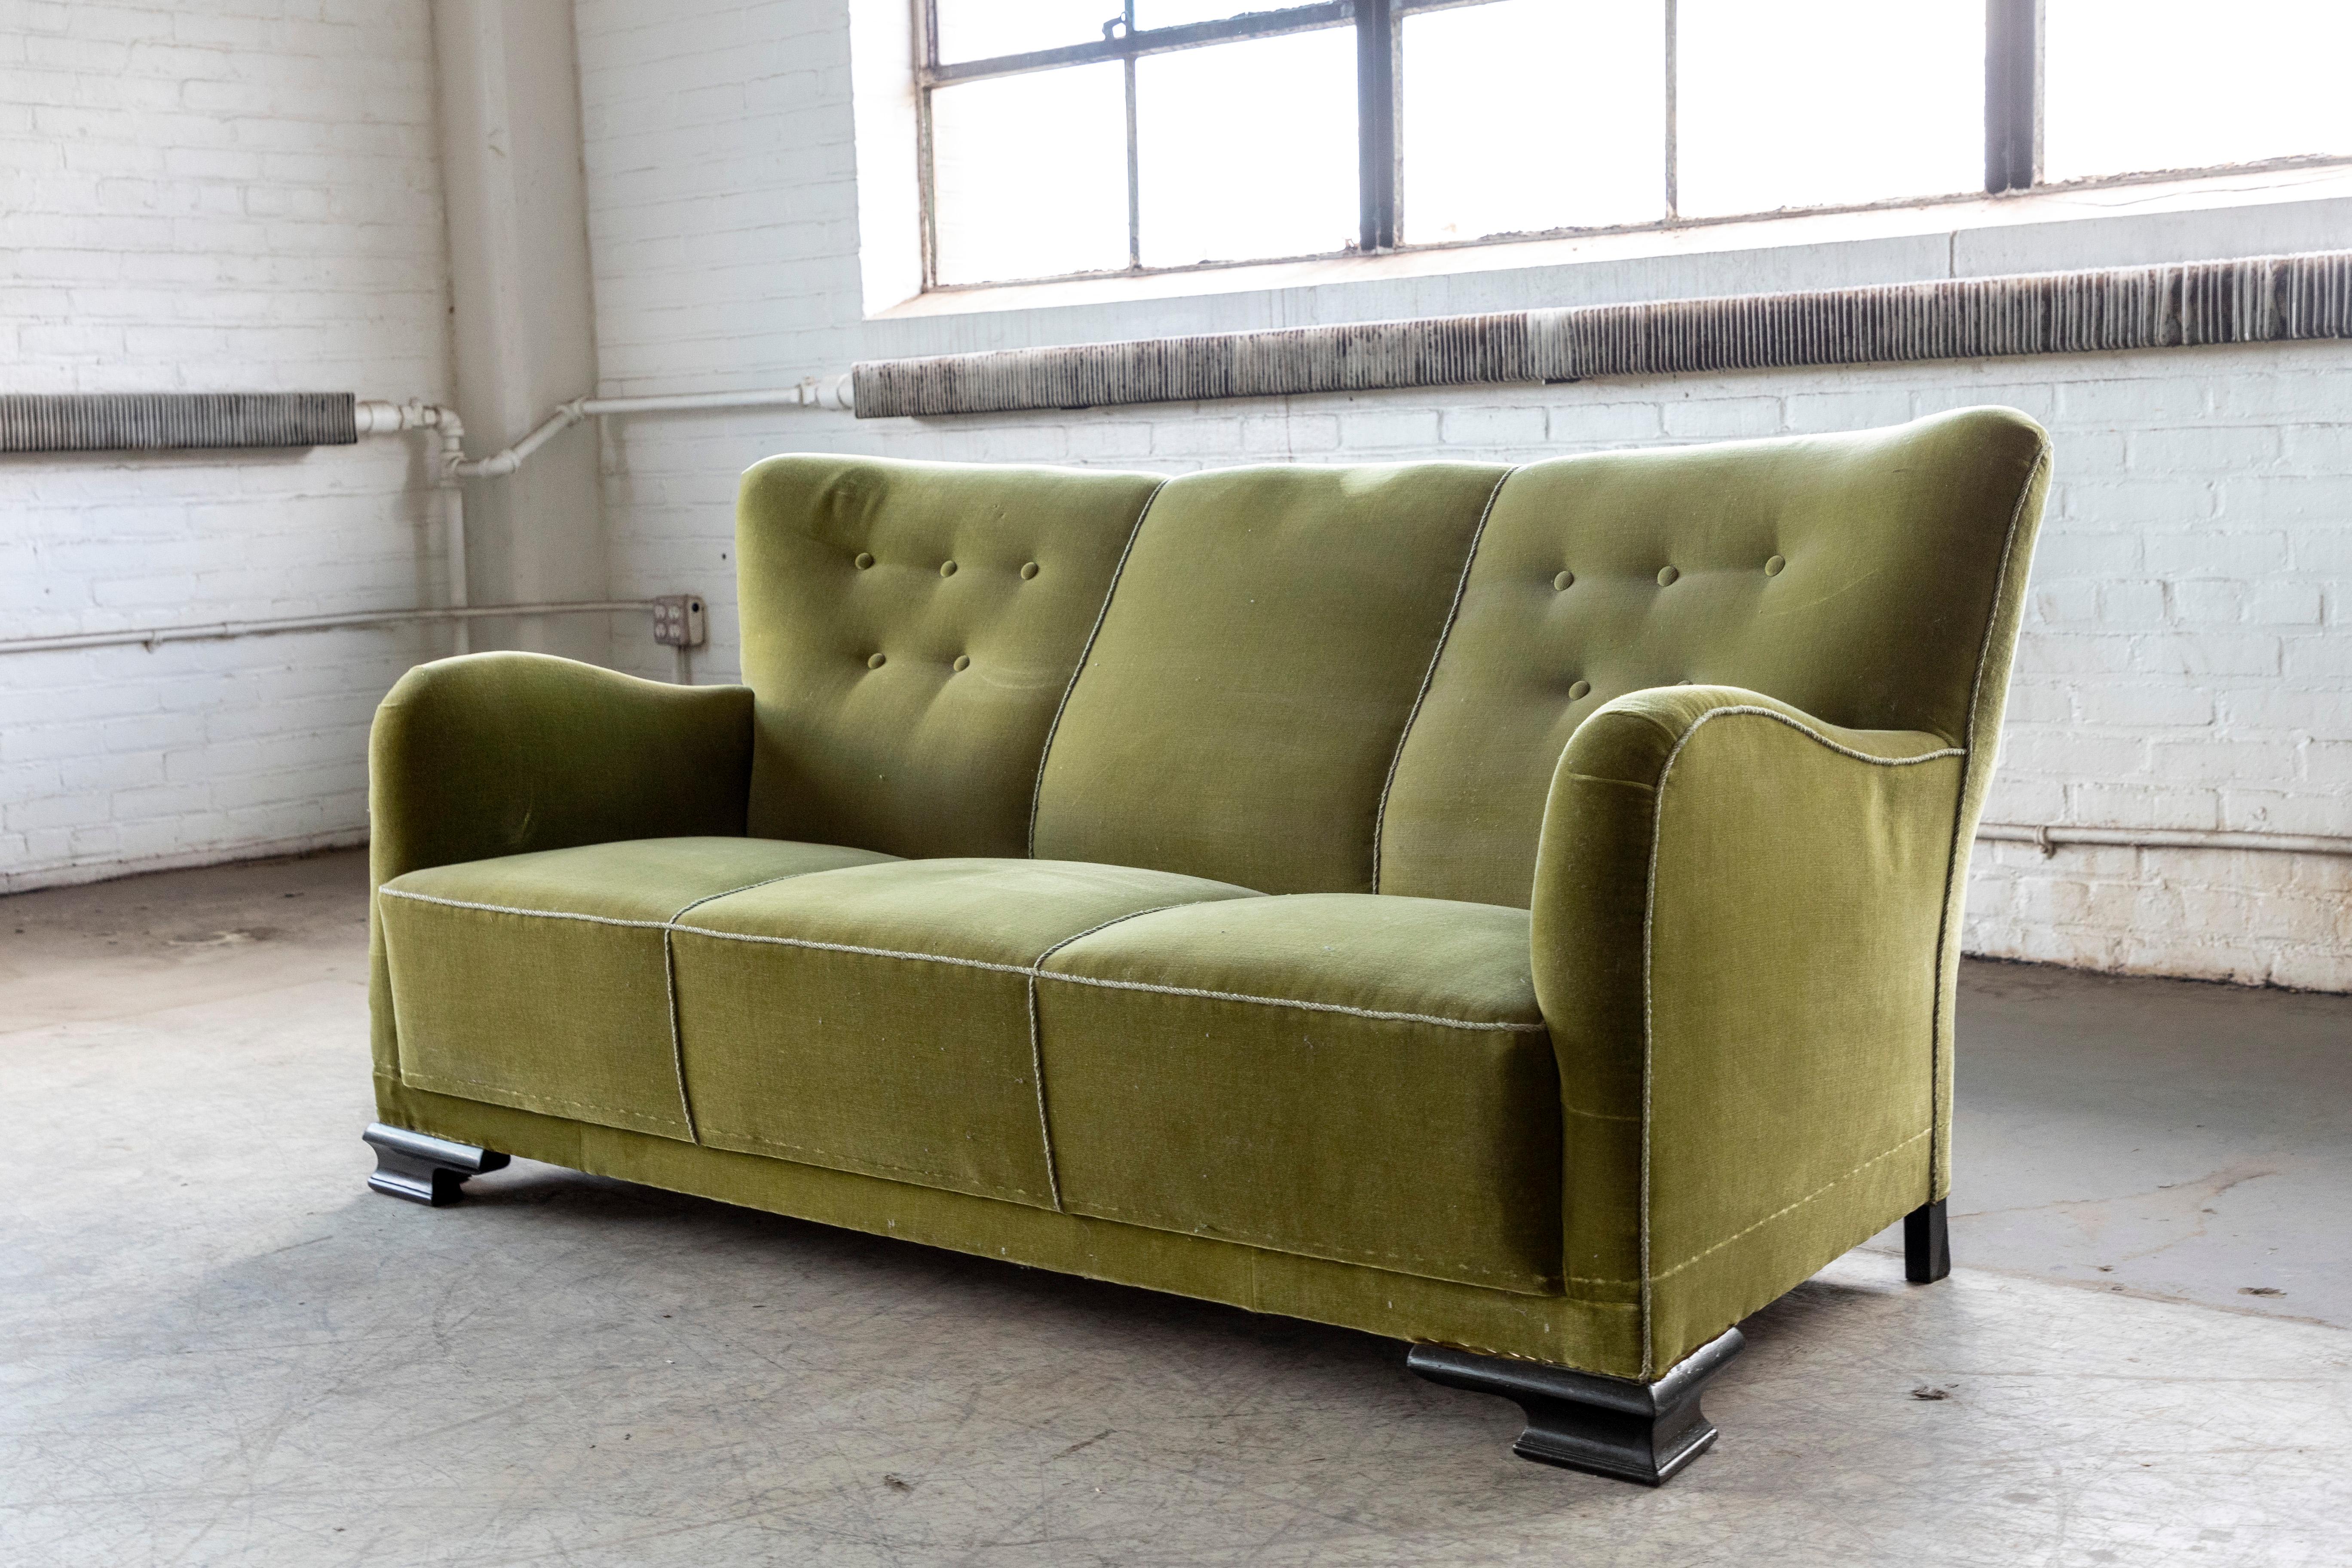 Danish Midcentury Sofa in Green Mohair with Art Deco Legs For Sale 1